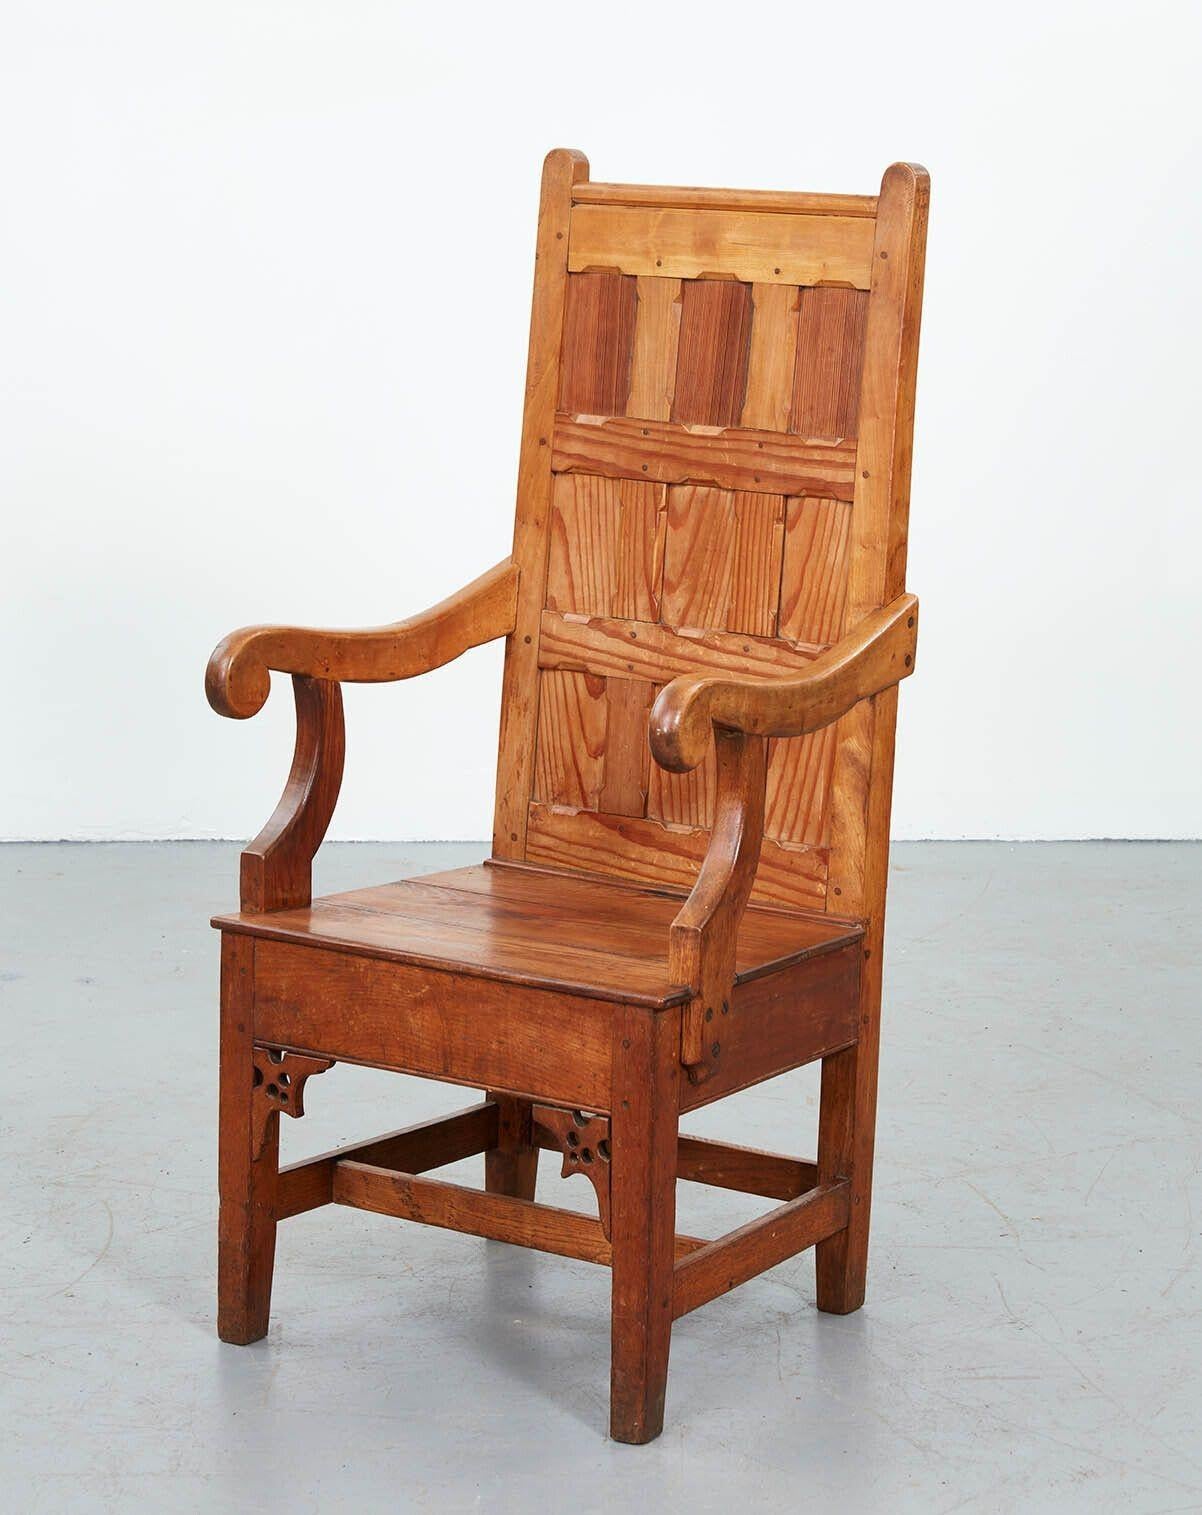 A rare 19th century Canadian tall back armchair in pine. Fine quality quarter sawn timber and craftsmanship, with wooden peg and tenon construction and floating panels. The back support is paneled in a three by three grid, with chamfered rails